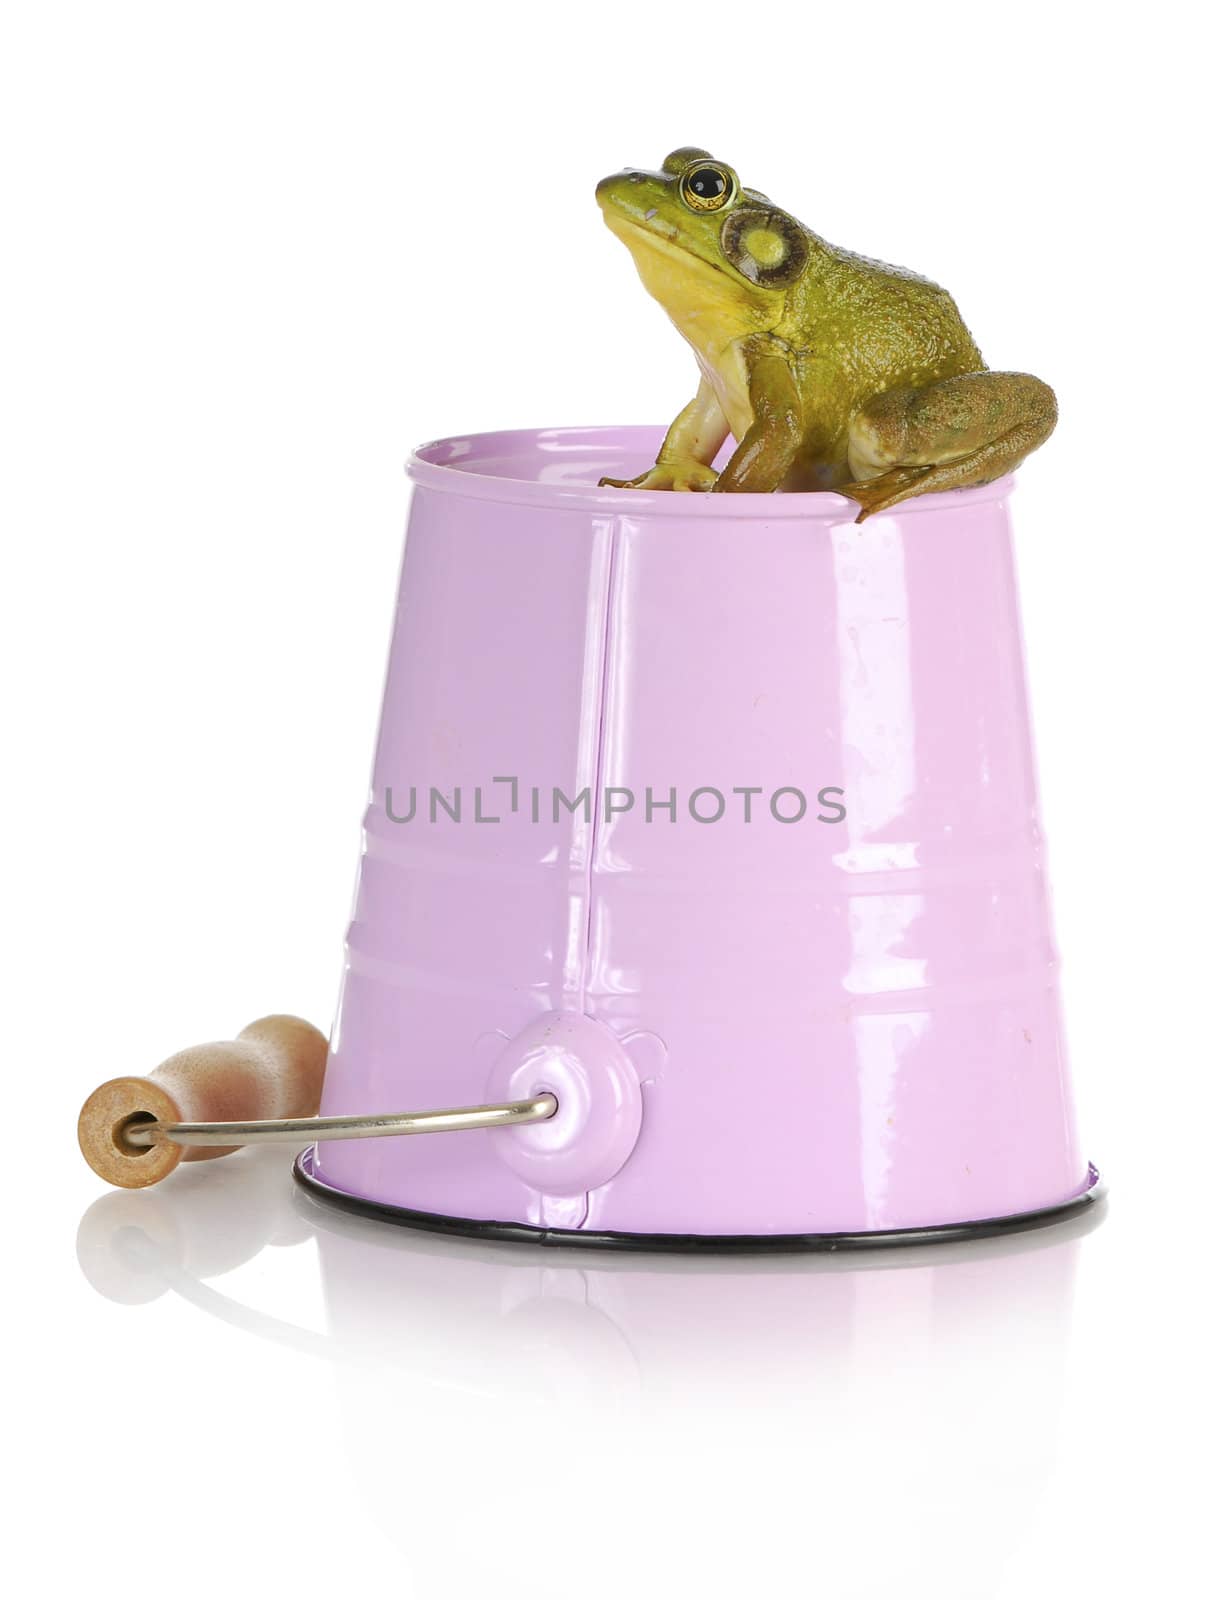 bull frog sitting on pink pail with reflection isolated on white background